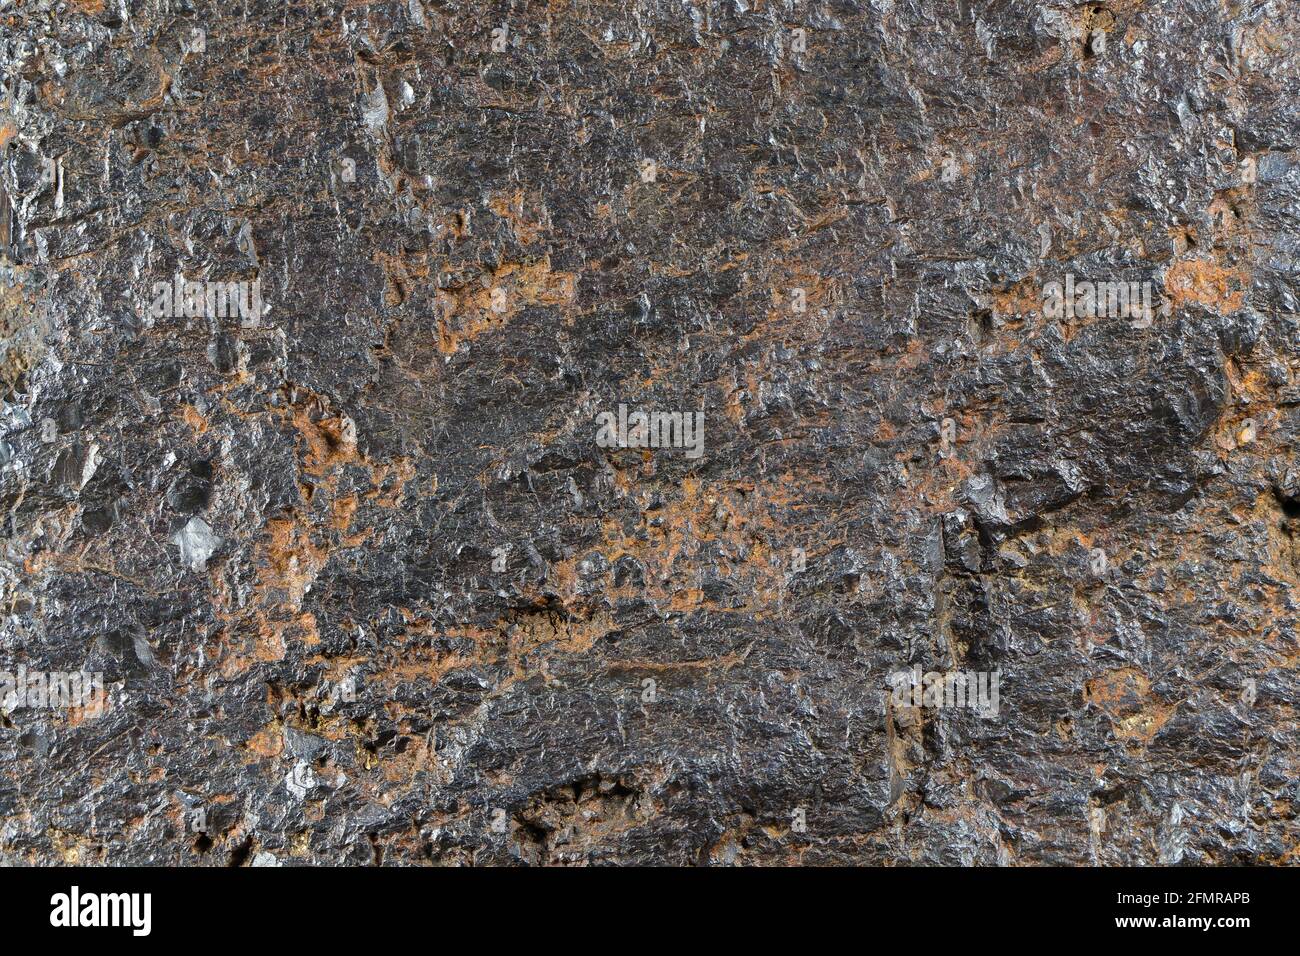 Solid Iron Ore Textured Face Surface Stock Photo